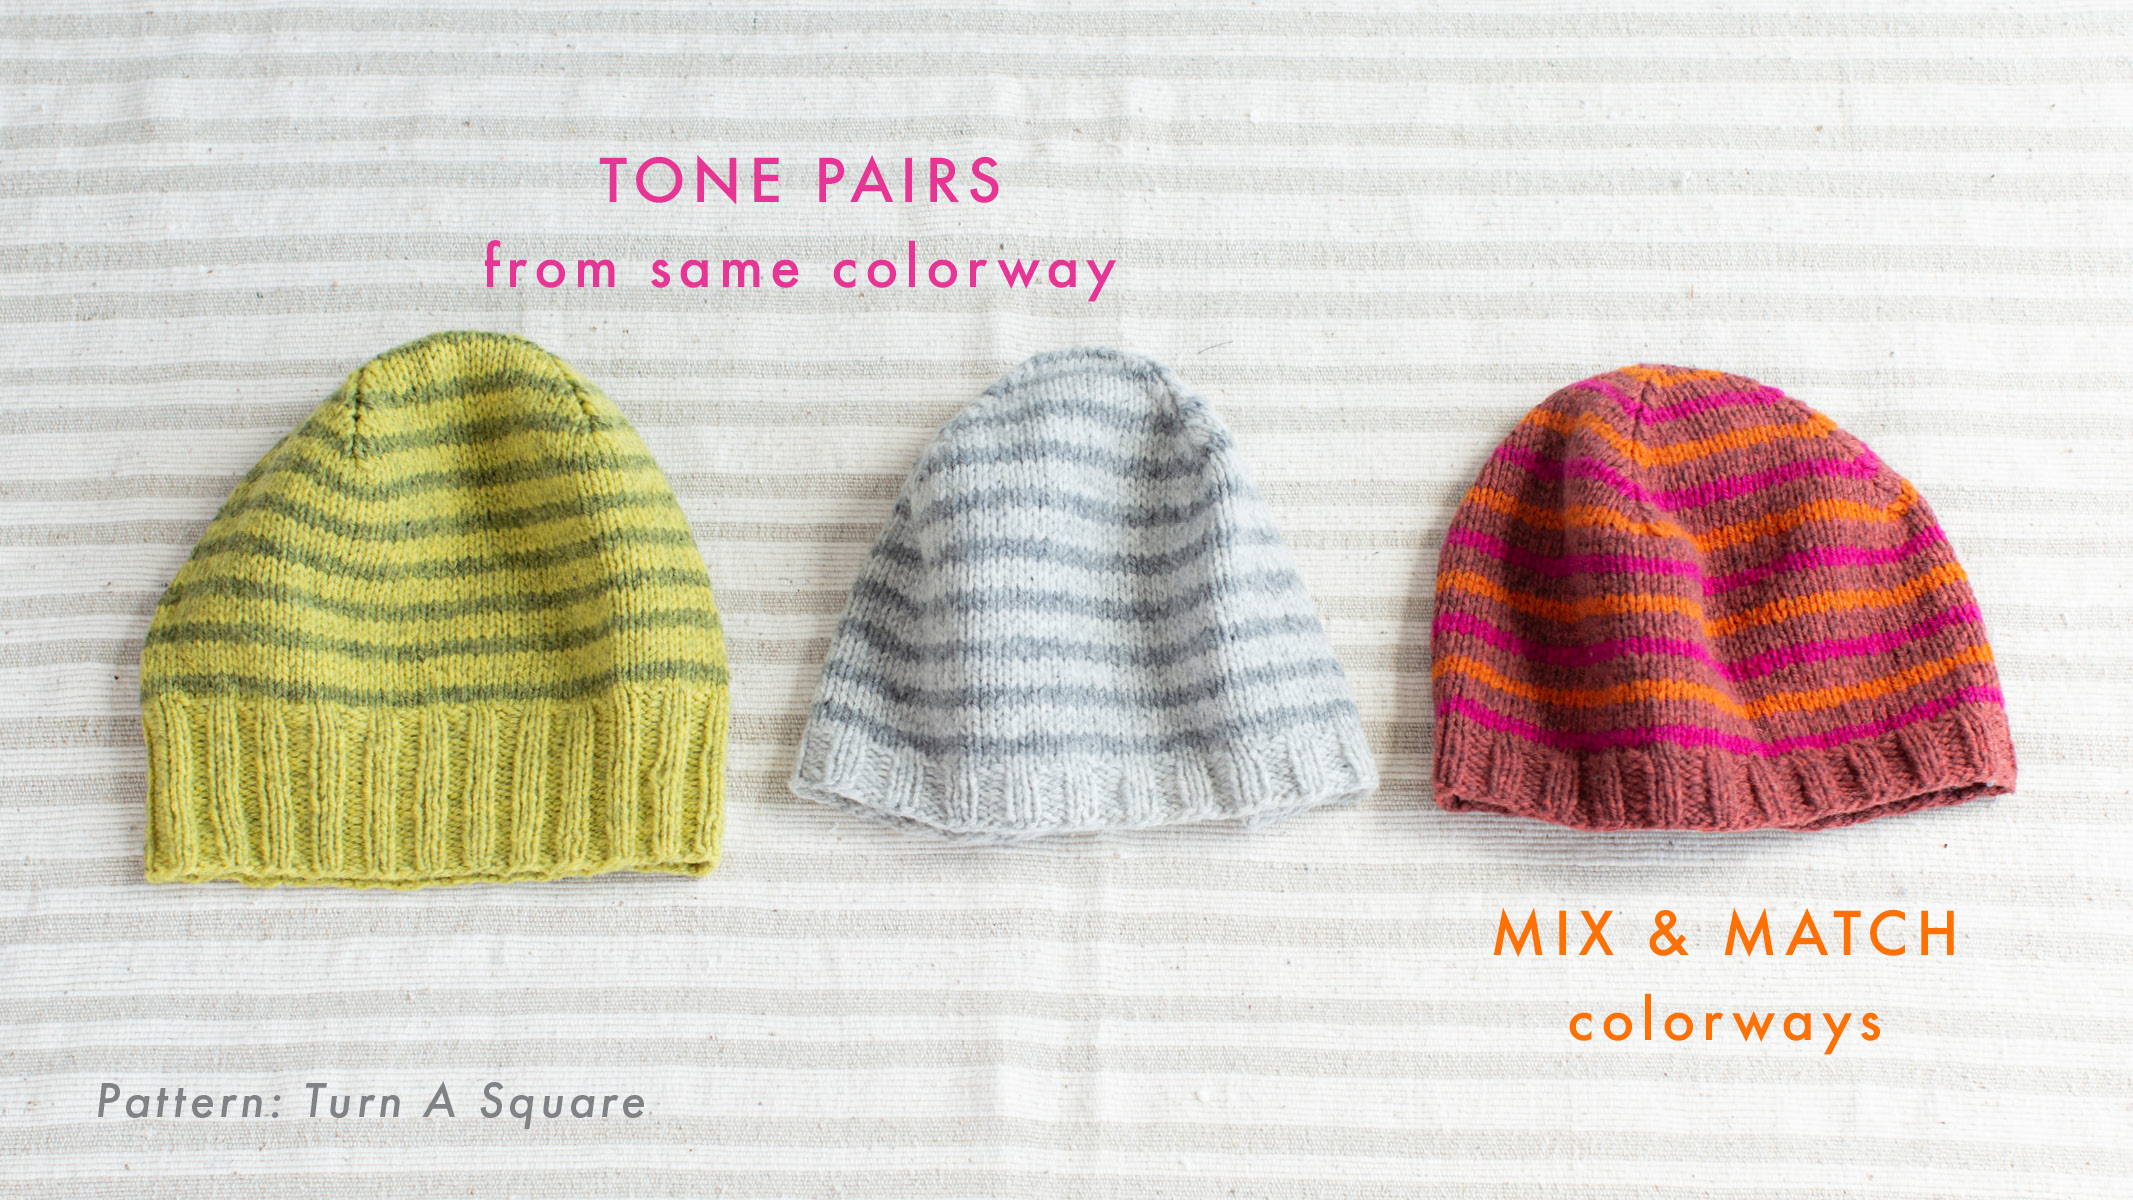 Three Brooklyn Tweed Turn A Square hats depicting different ways of mixing colorways with Tones.